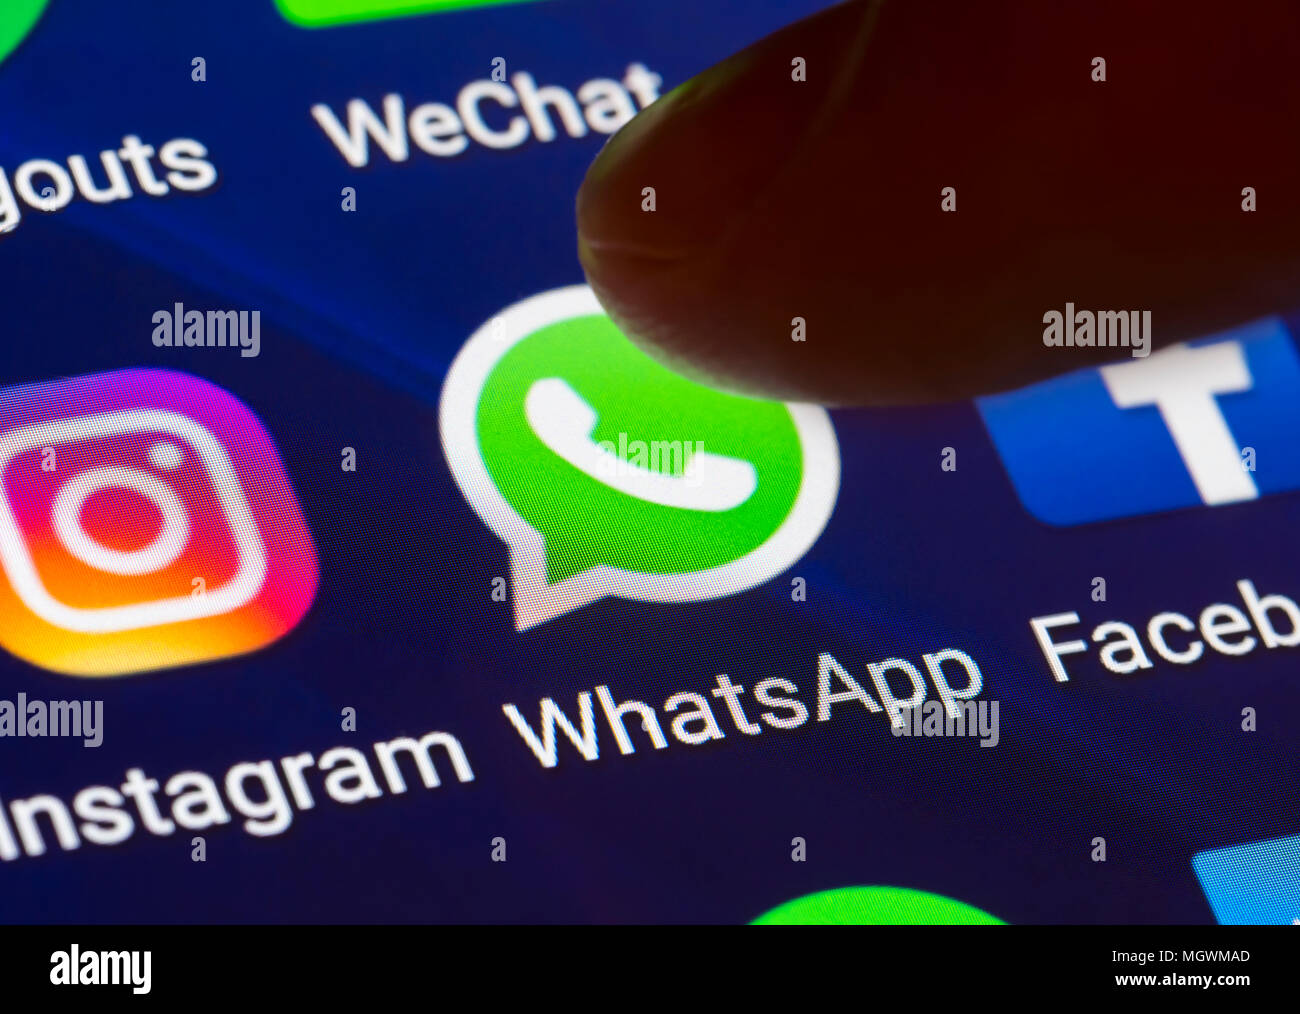 Whatsapp Icon. Finger pressing a shortcut icon to load the WhatsApp app on a tablet or smartphone screen. Whatsapp button. Stock Photo